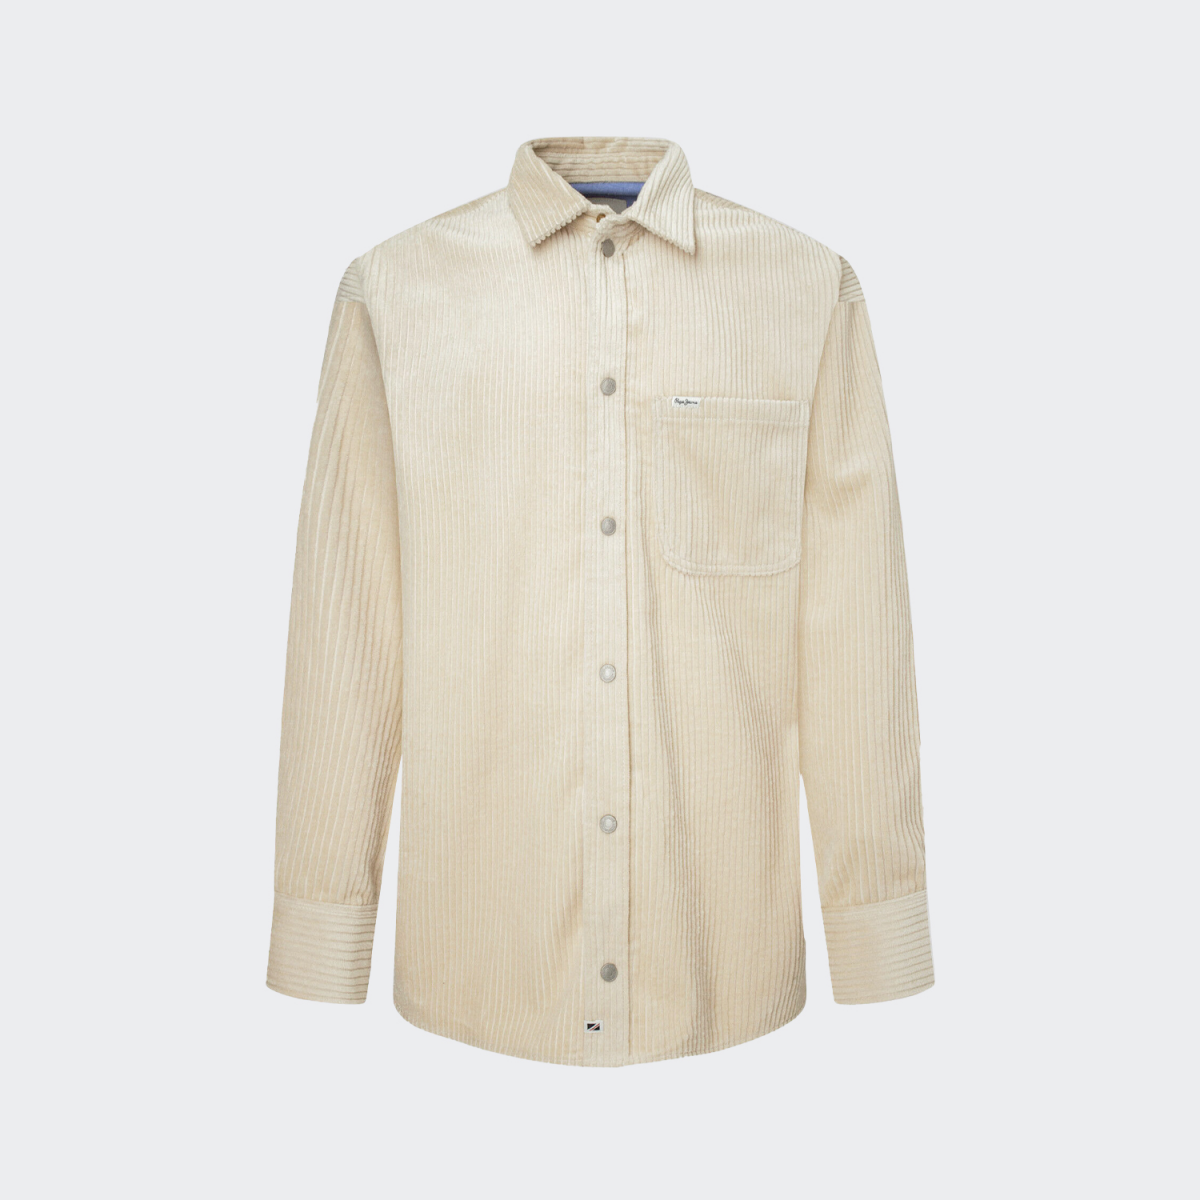 Pepe Jeans Beige Shirt PM308175847_1 - Project Urban 